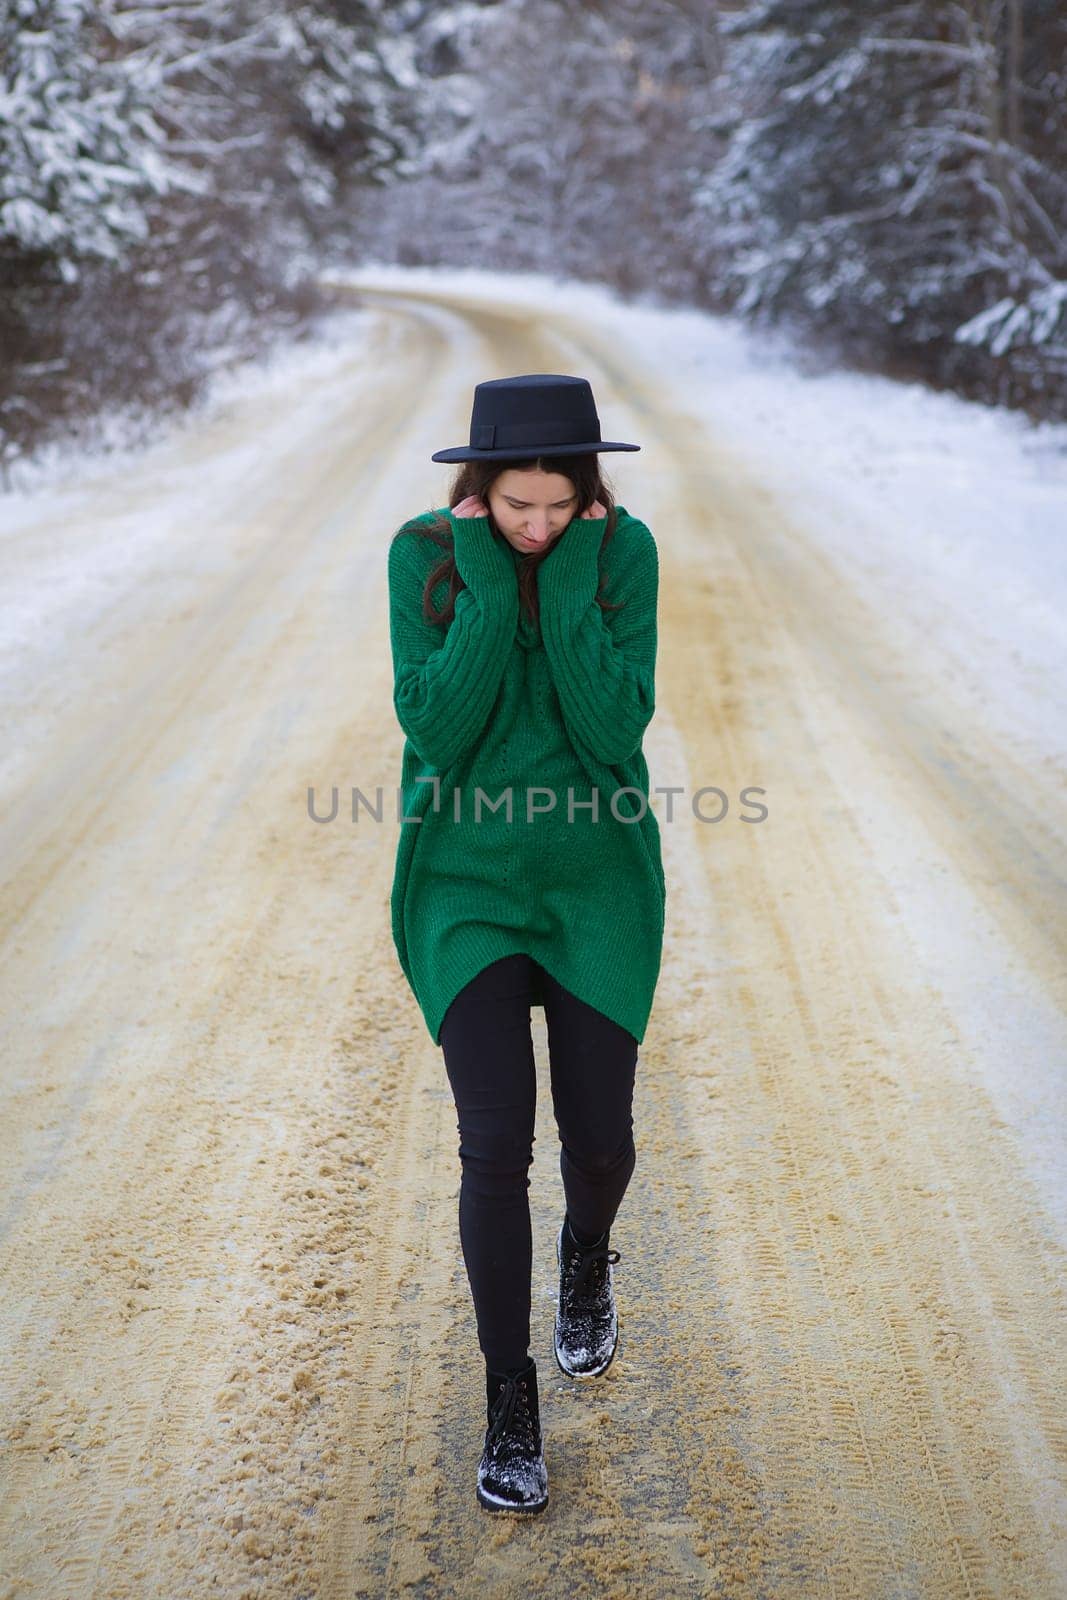 A young girl in a green sweater stands in the middle of a snowy road in a thick pine forest. Freezing day